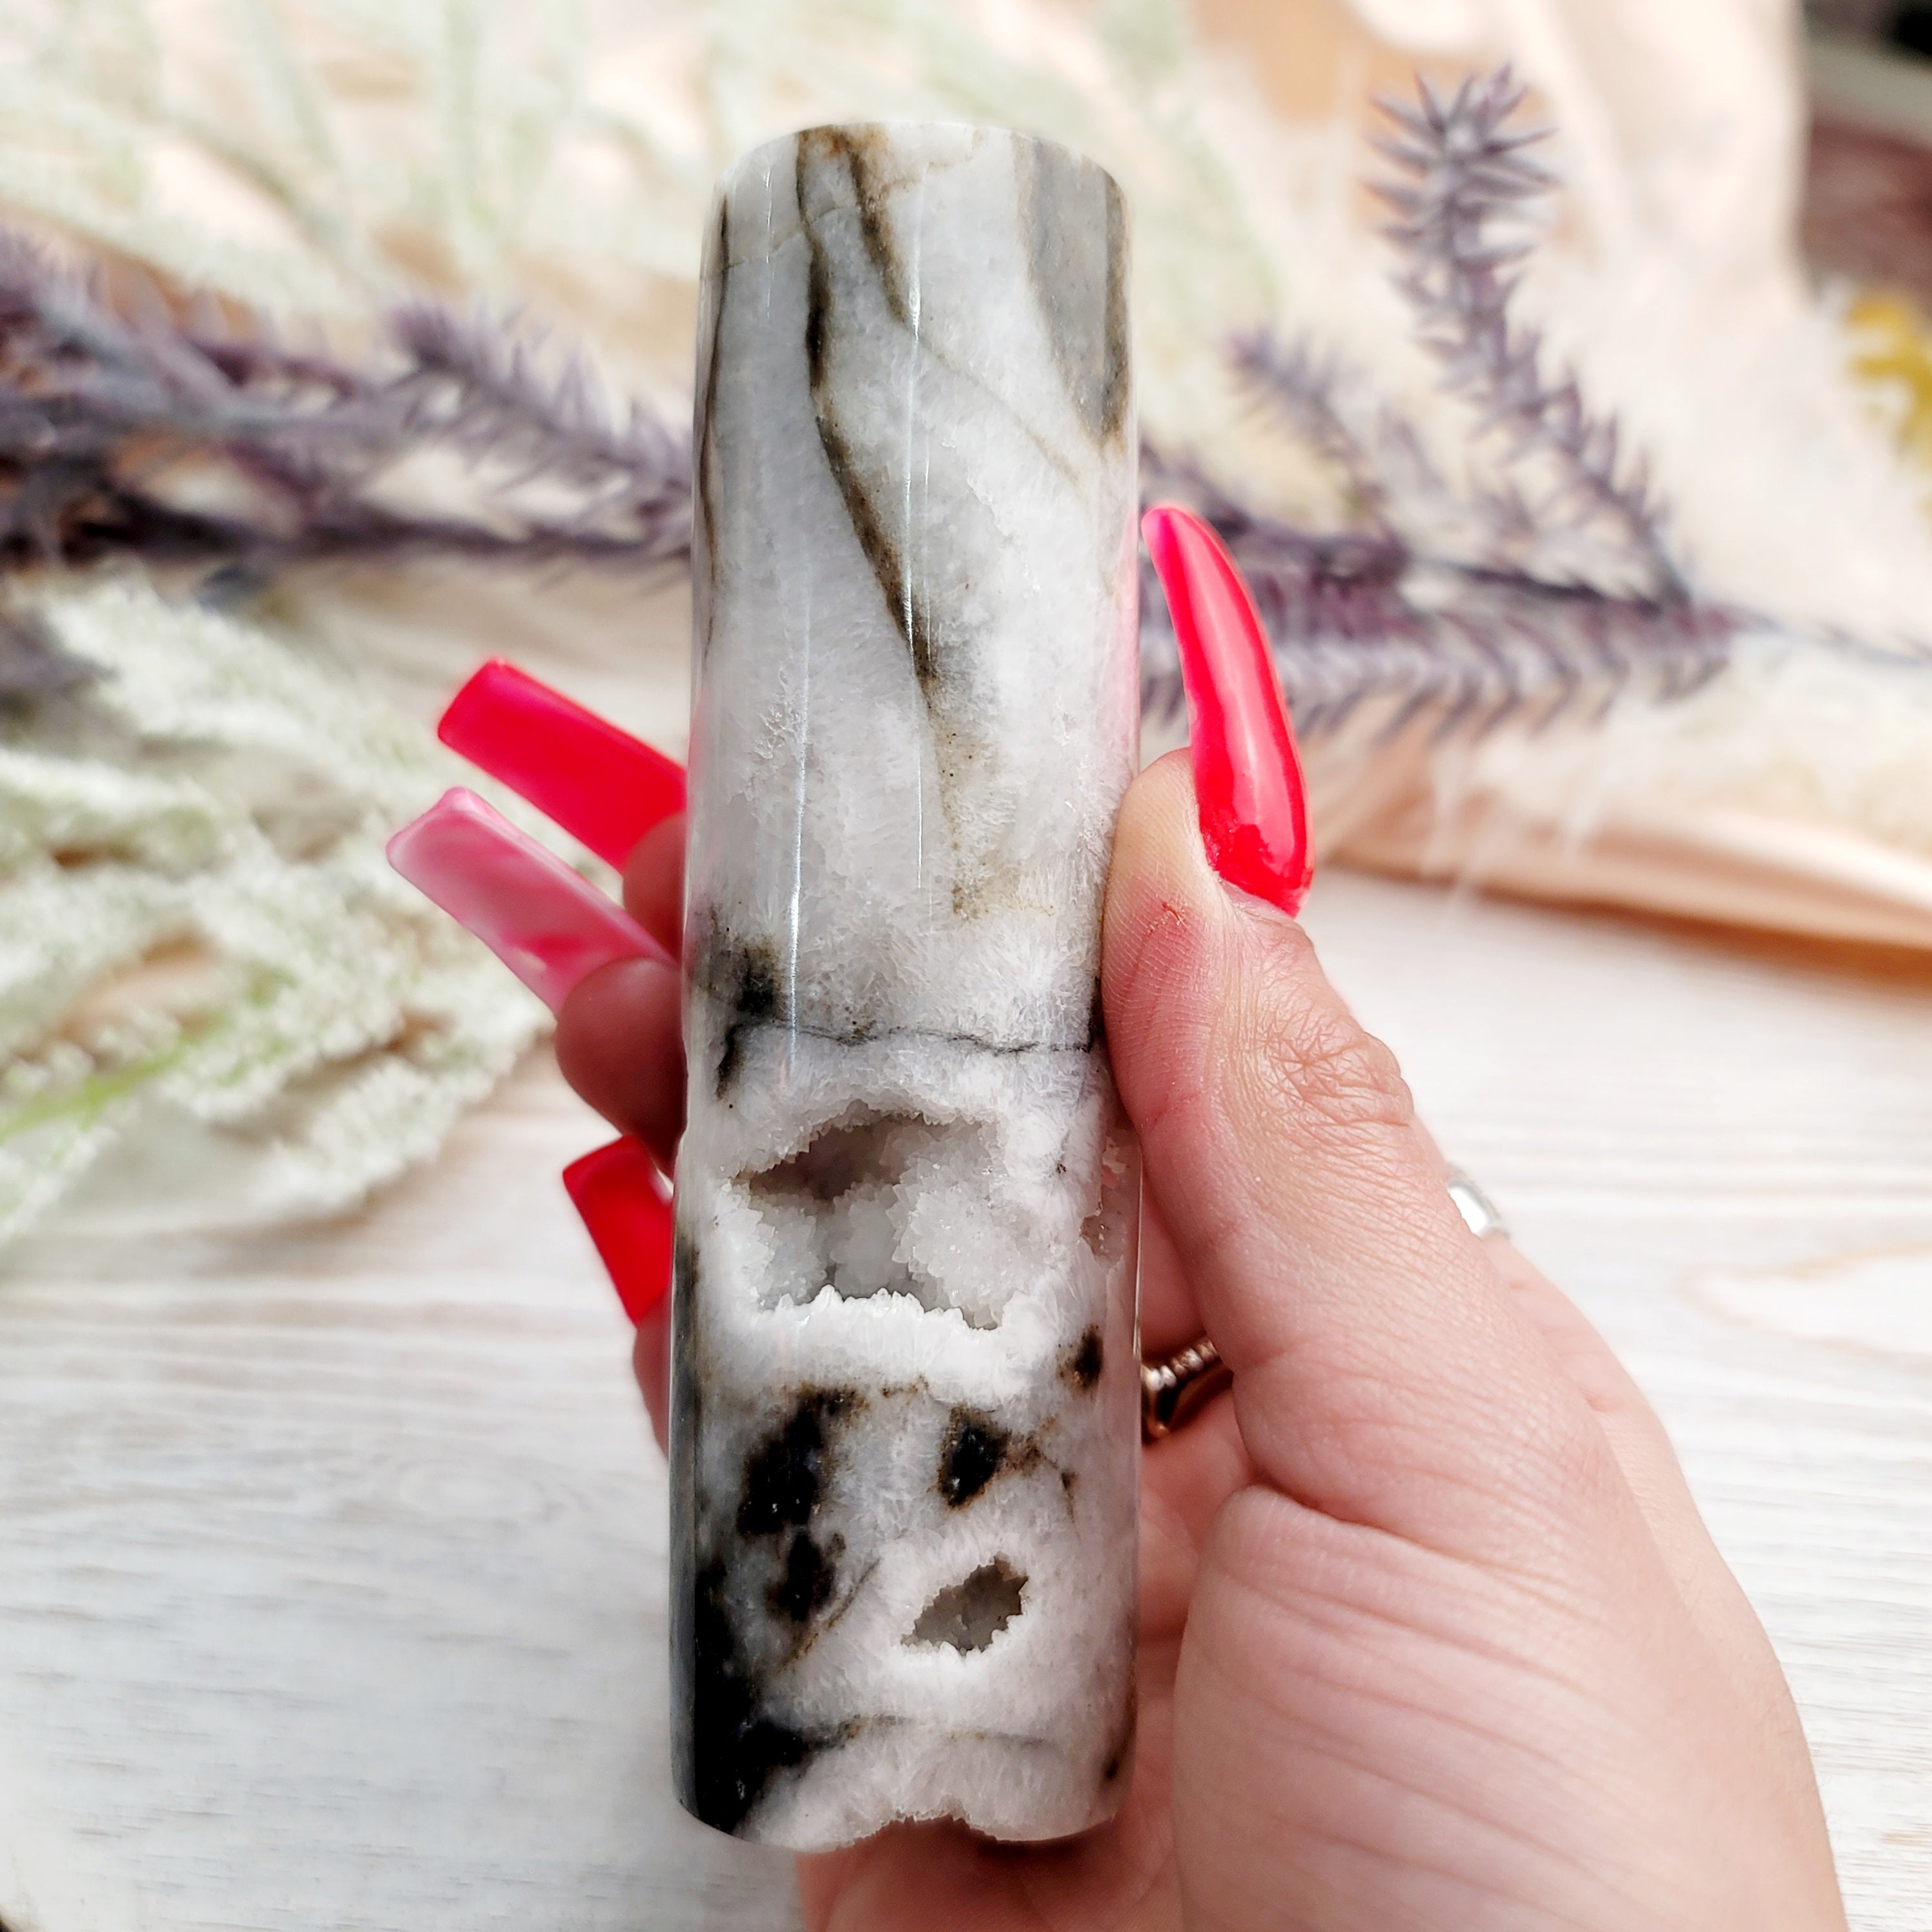 Zebra Agate Harmonizer for Balance, Clearing Blockages and Releasing Negativity